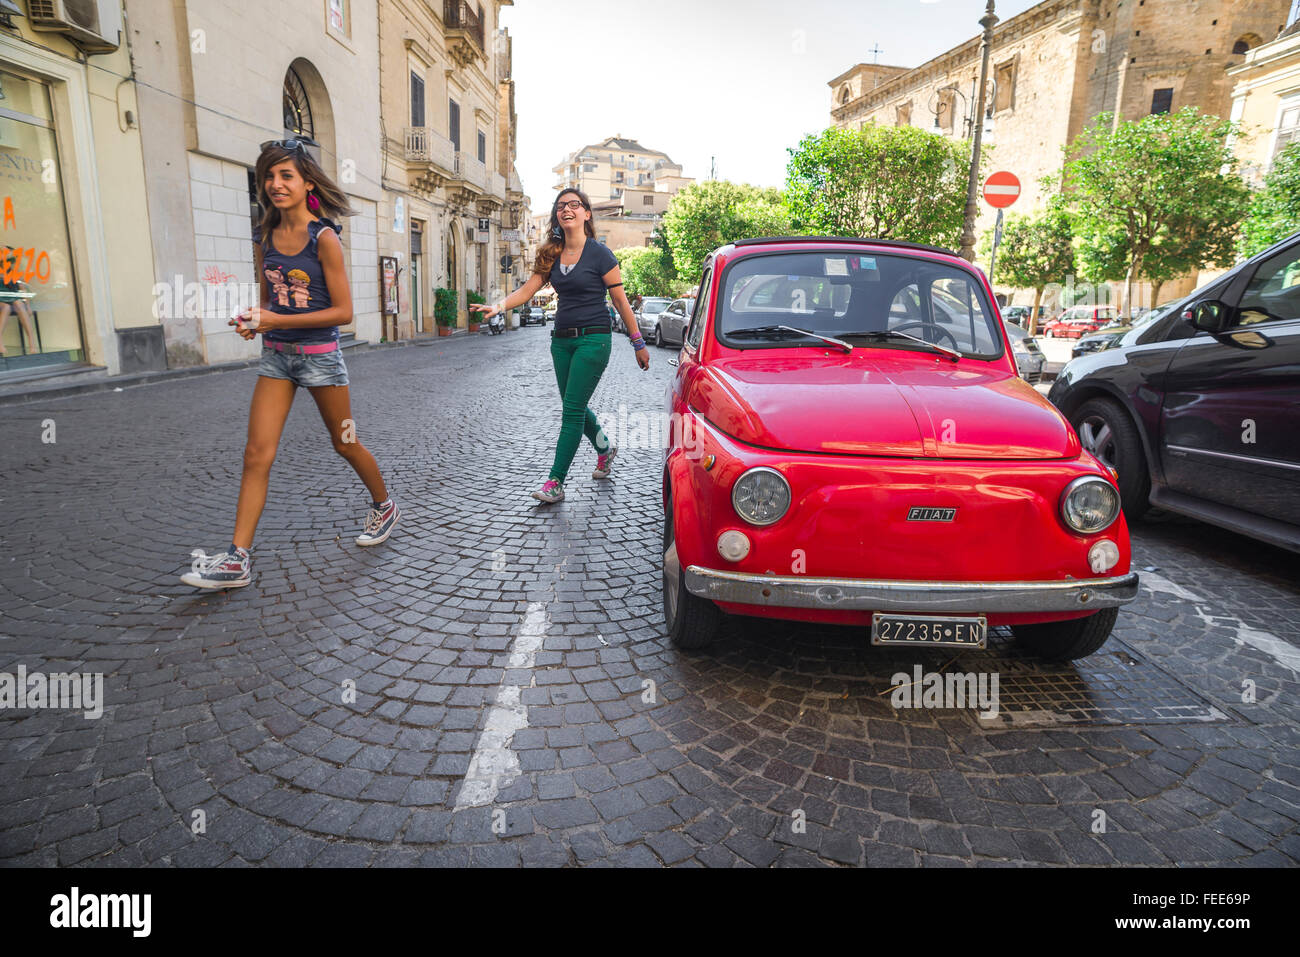 Fiat 500 Italy, view of two teenage women walking past a classic Fiat 500 Cinquecento parked in the Via Roma, Enna, Sicily. Stock Photo